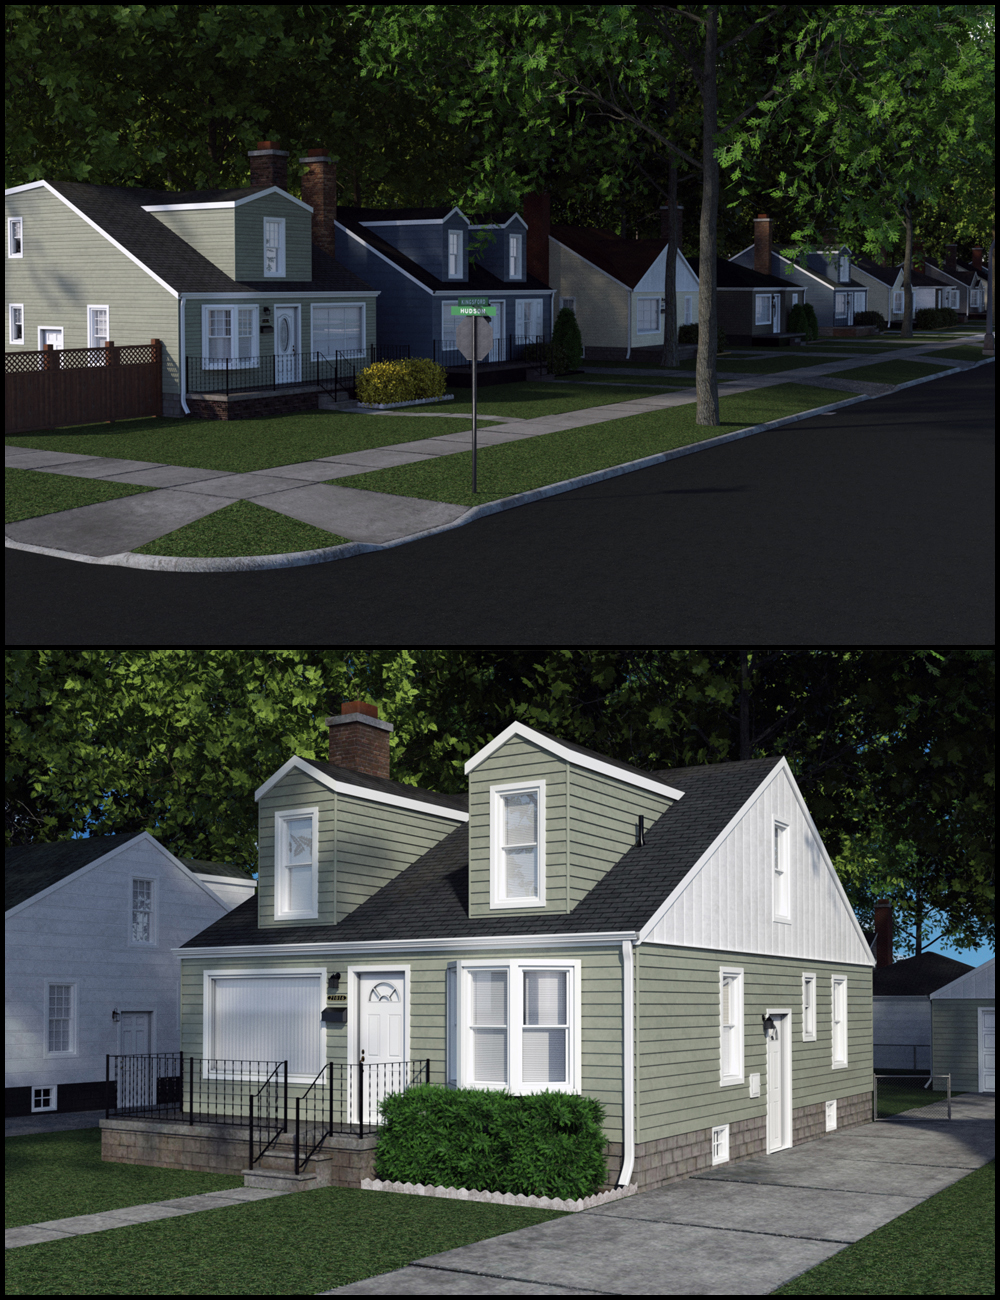 Collective3d Neighborhood Block 1 by: Collective3d, 3D Models by Daz 3D